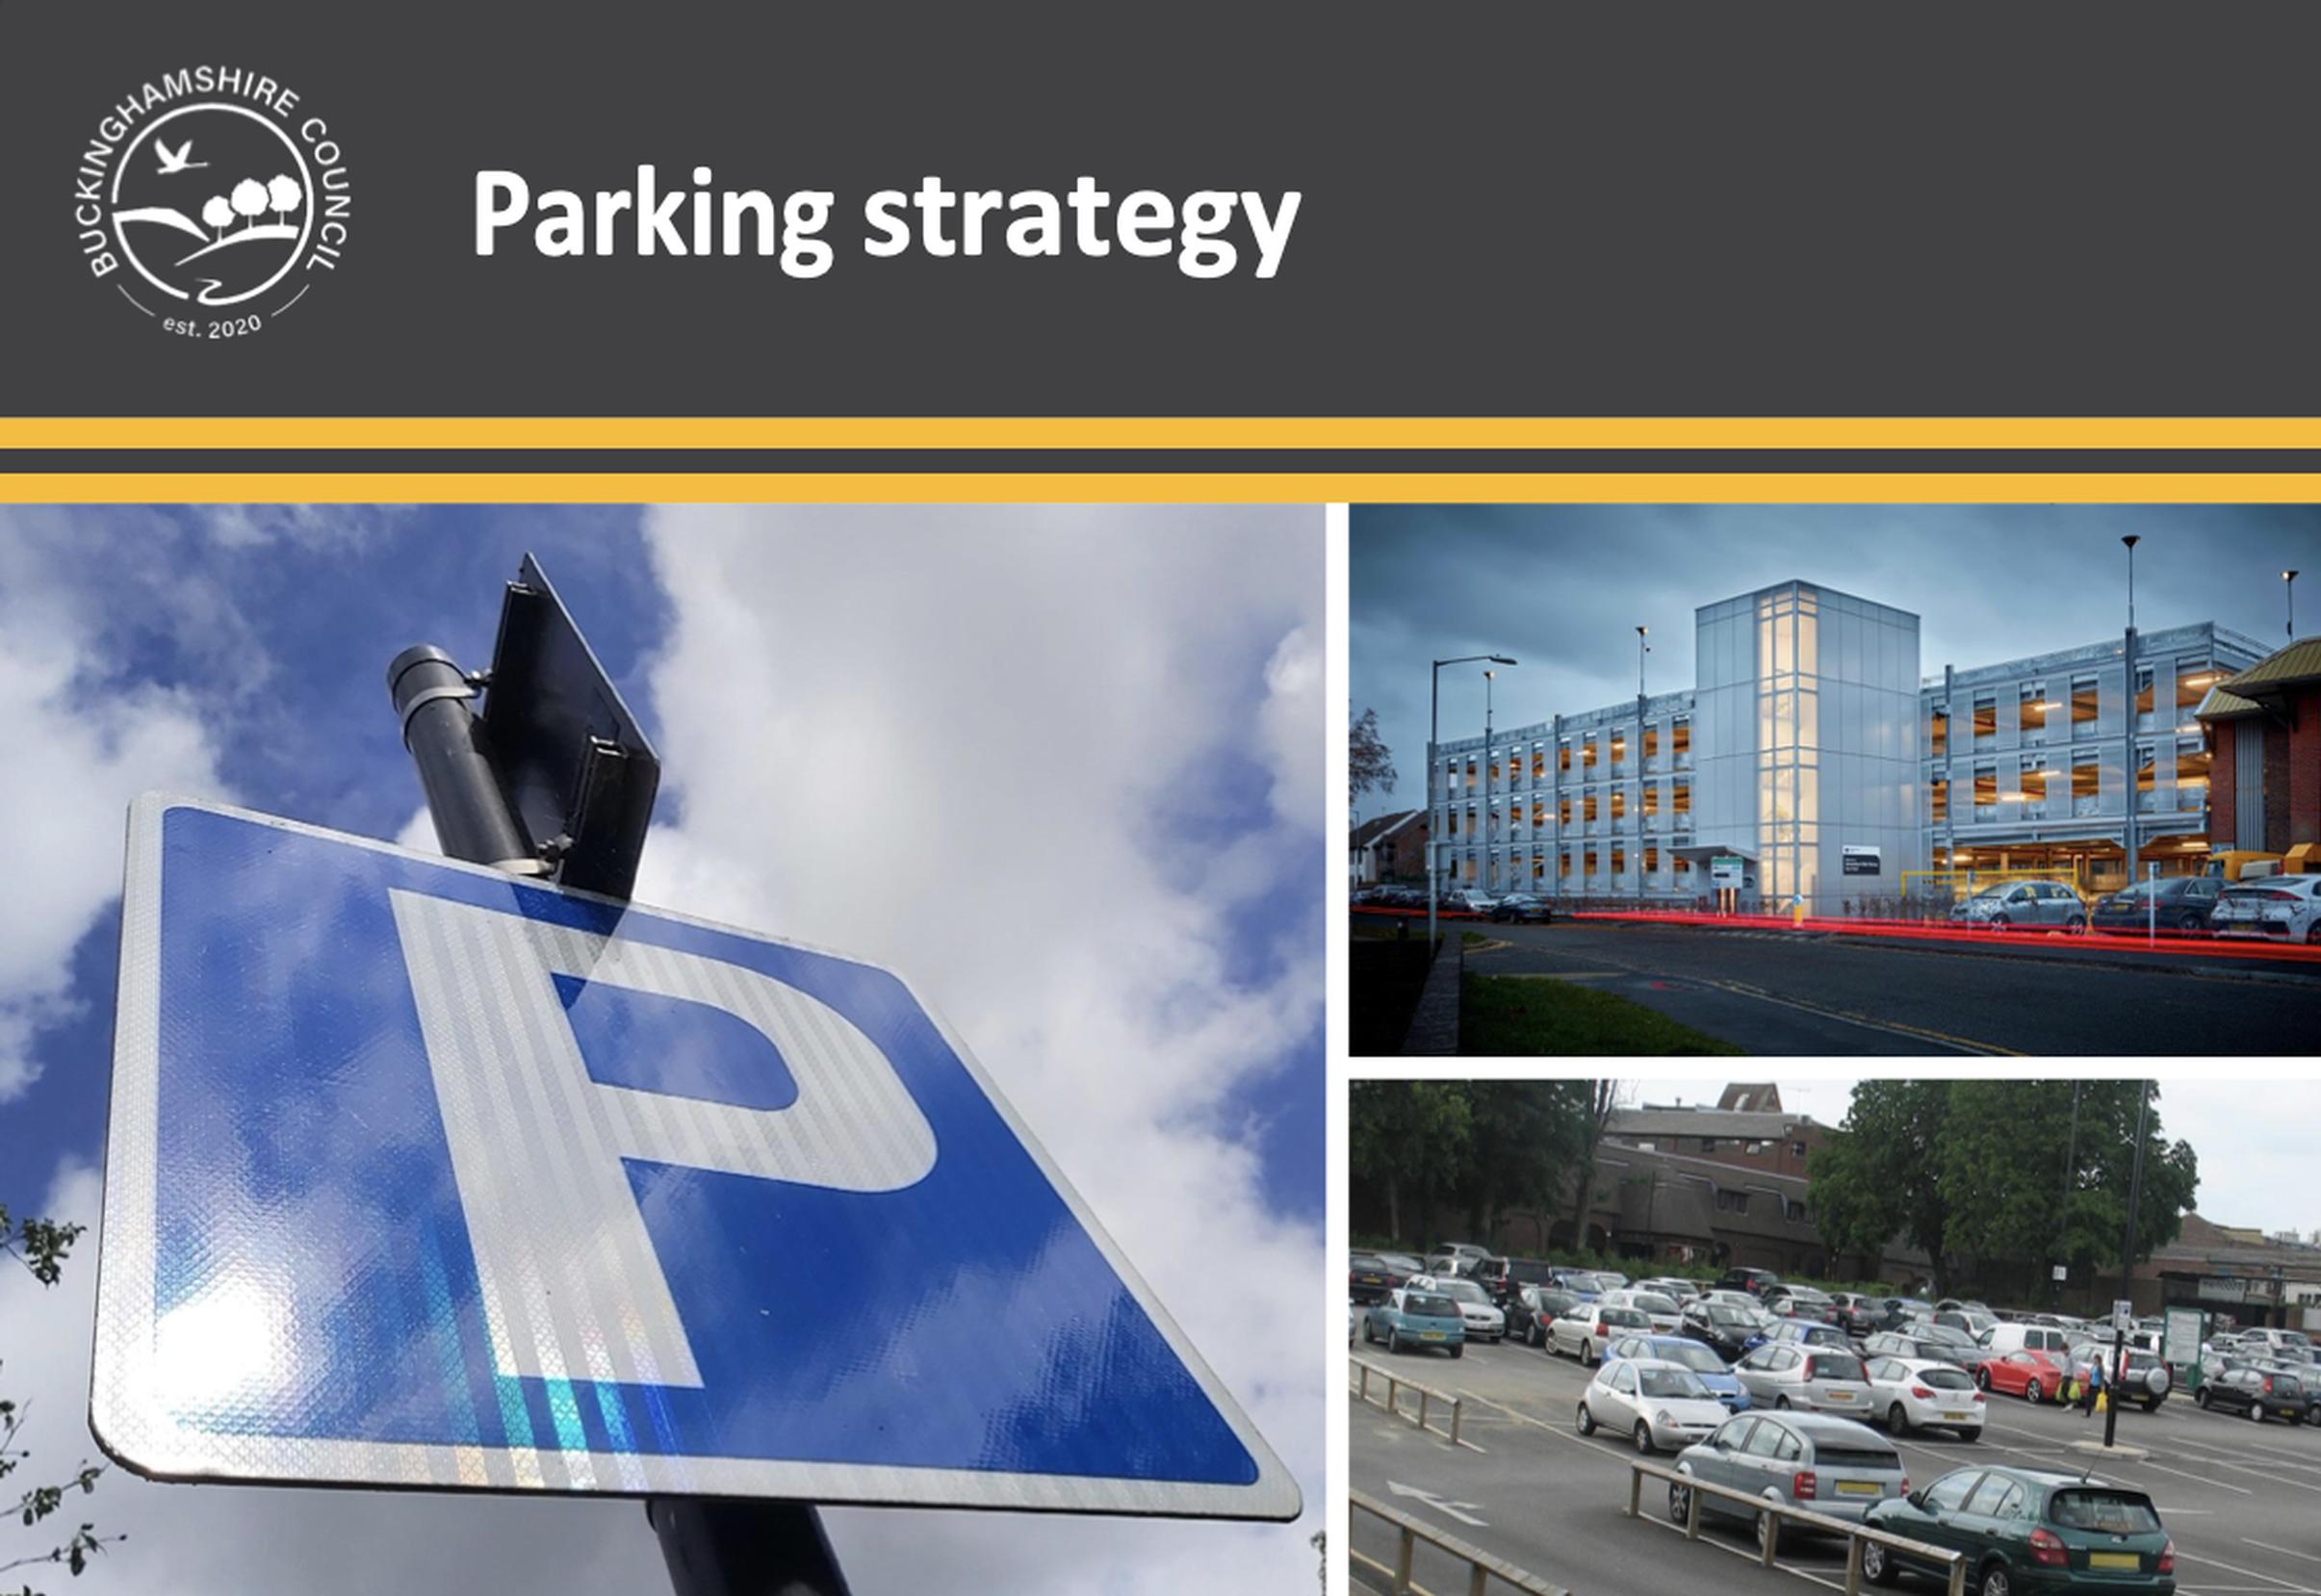 A new vision for parking in Buckinghamshire